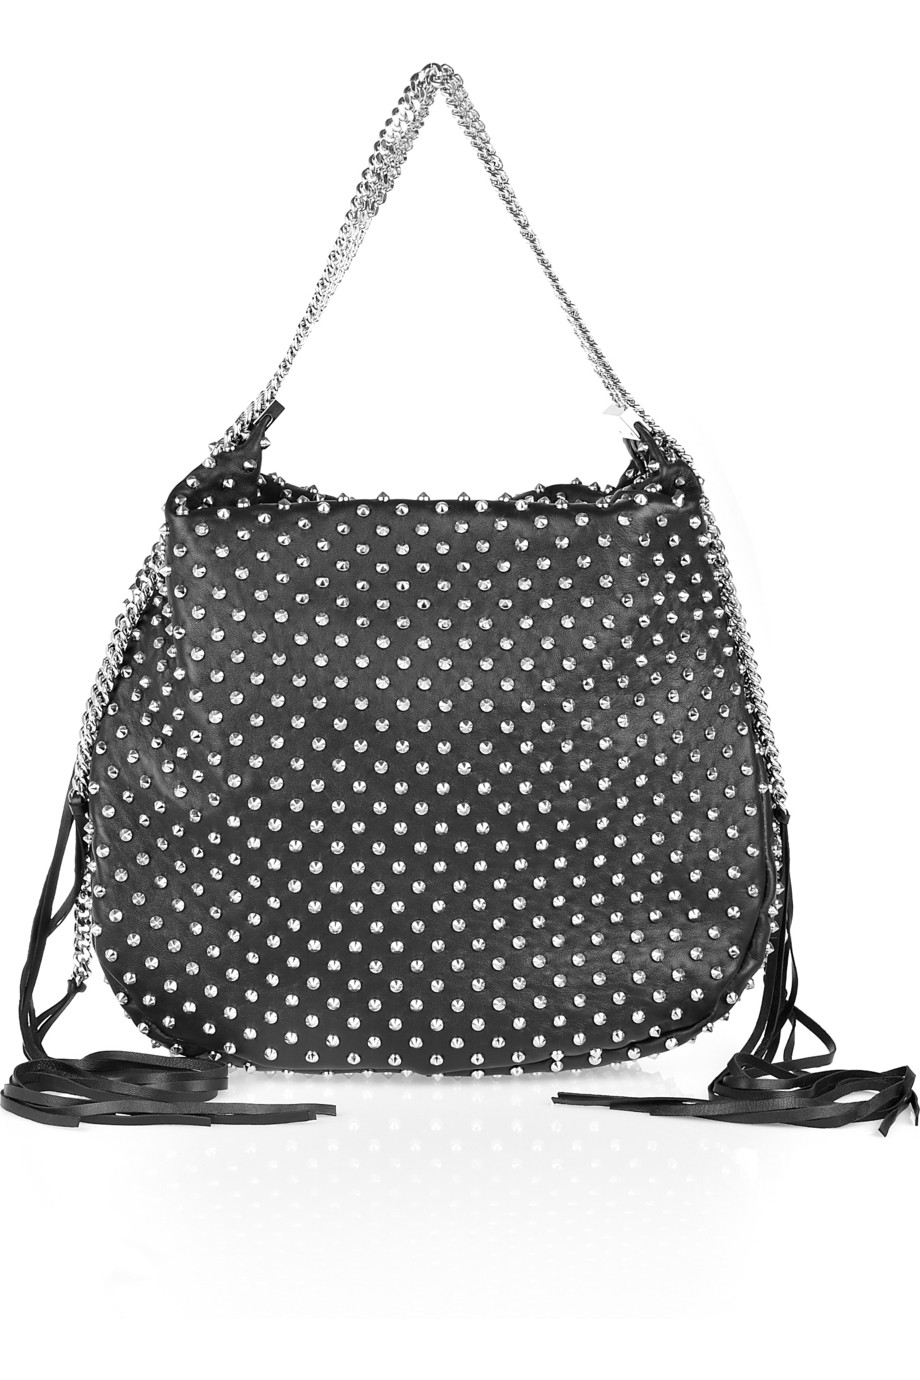 Christian Louboutin Marianna Rider Spikes Leather Hobo Bag in Black - Lyst